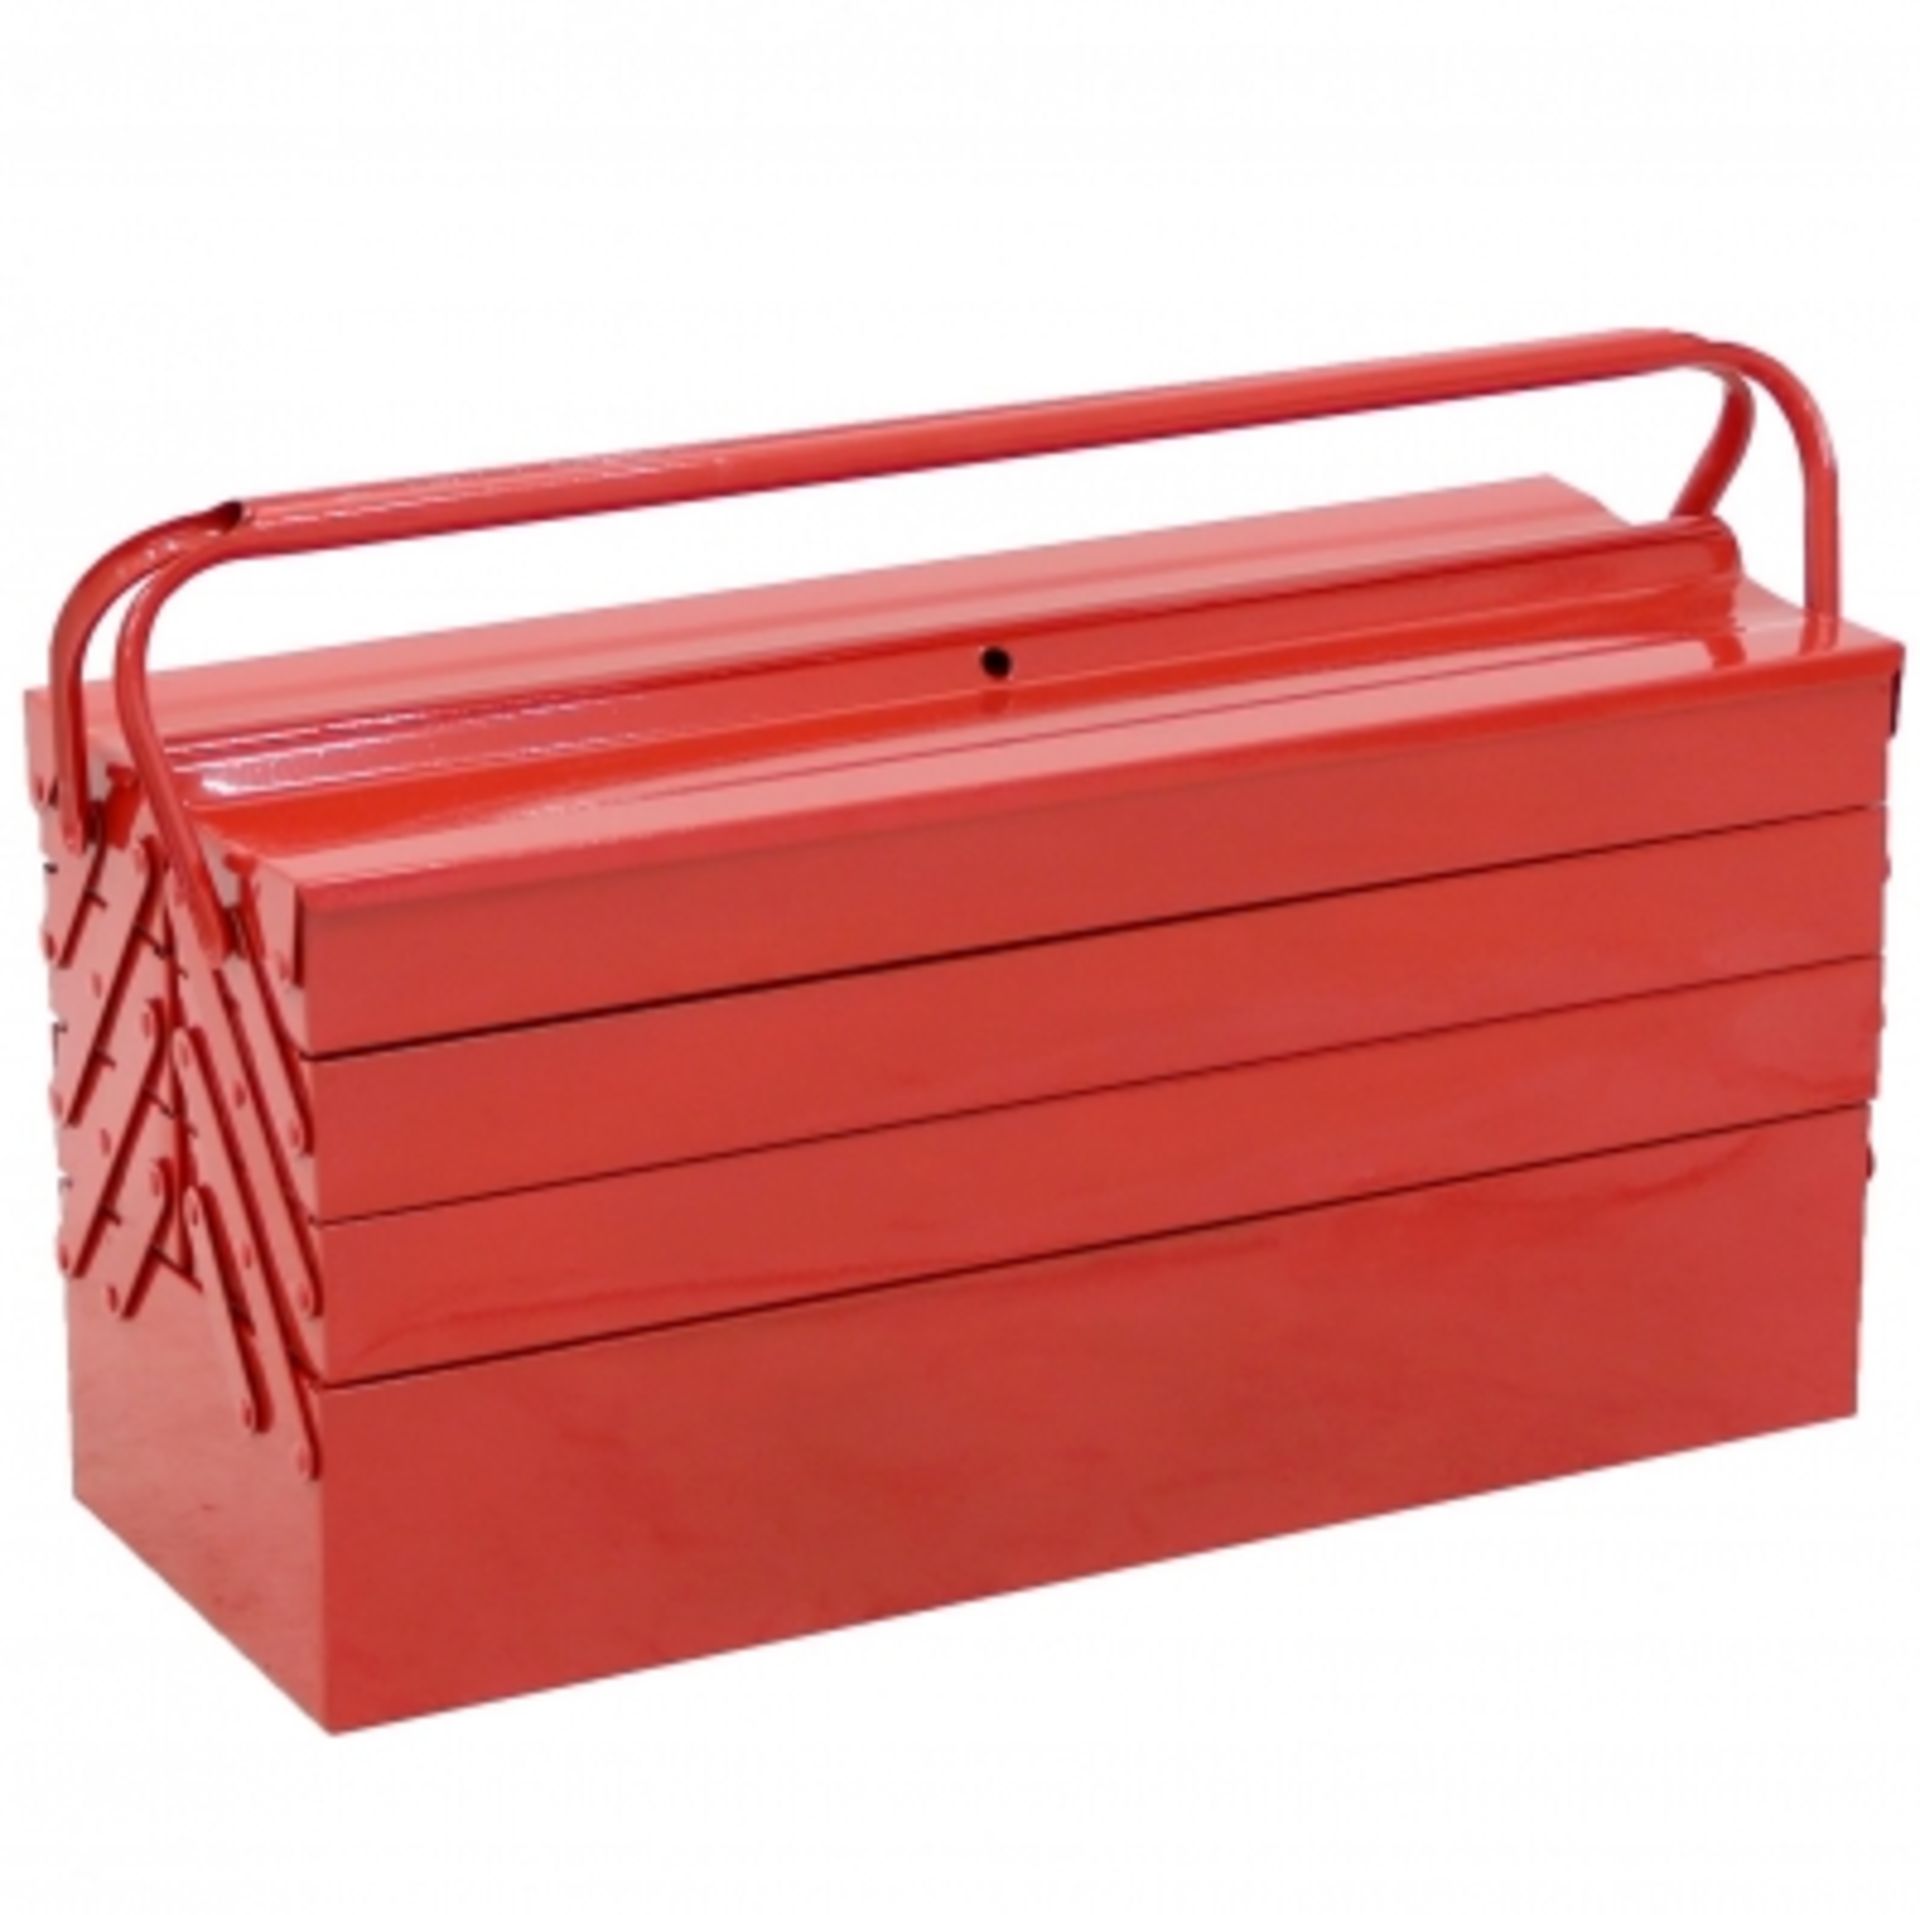 4 Tier 7 Tray Heavy Duty Metal Cantilever Tool Box 21" / 530mm. The classic design cantilever tool